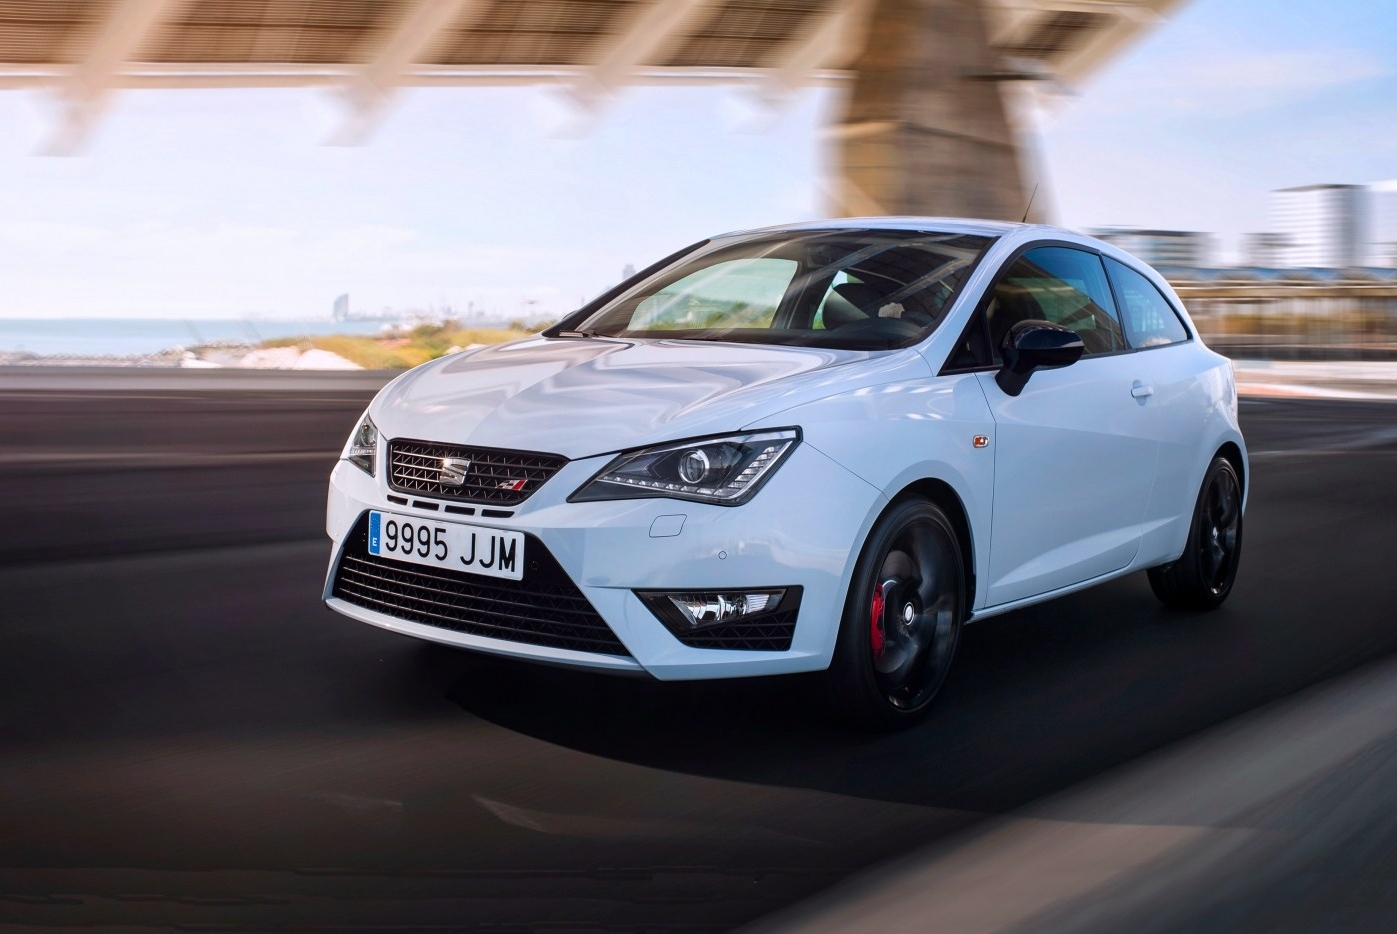 Seat unveiled the fifth generation of its best-selling Ibiza in Barcelona